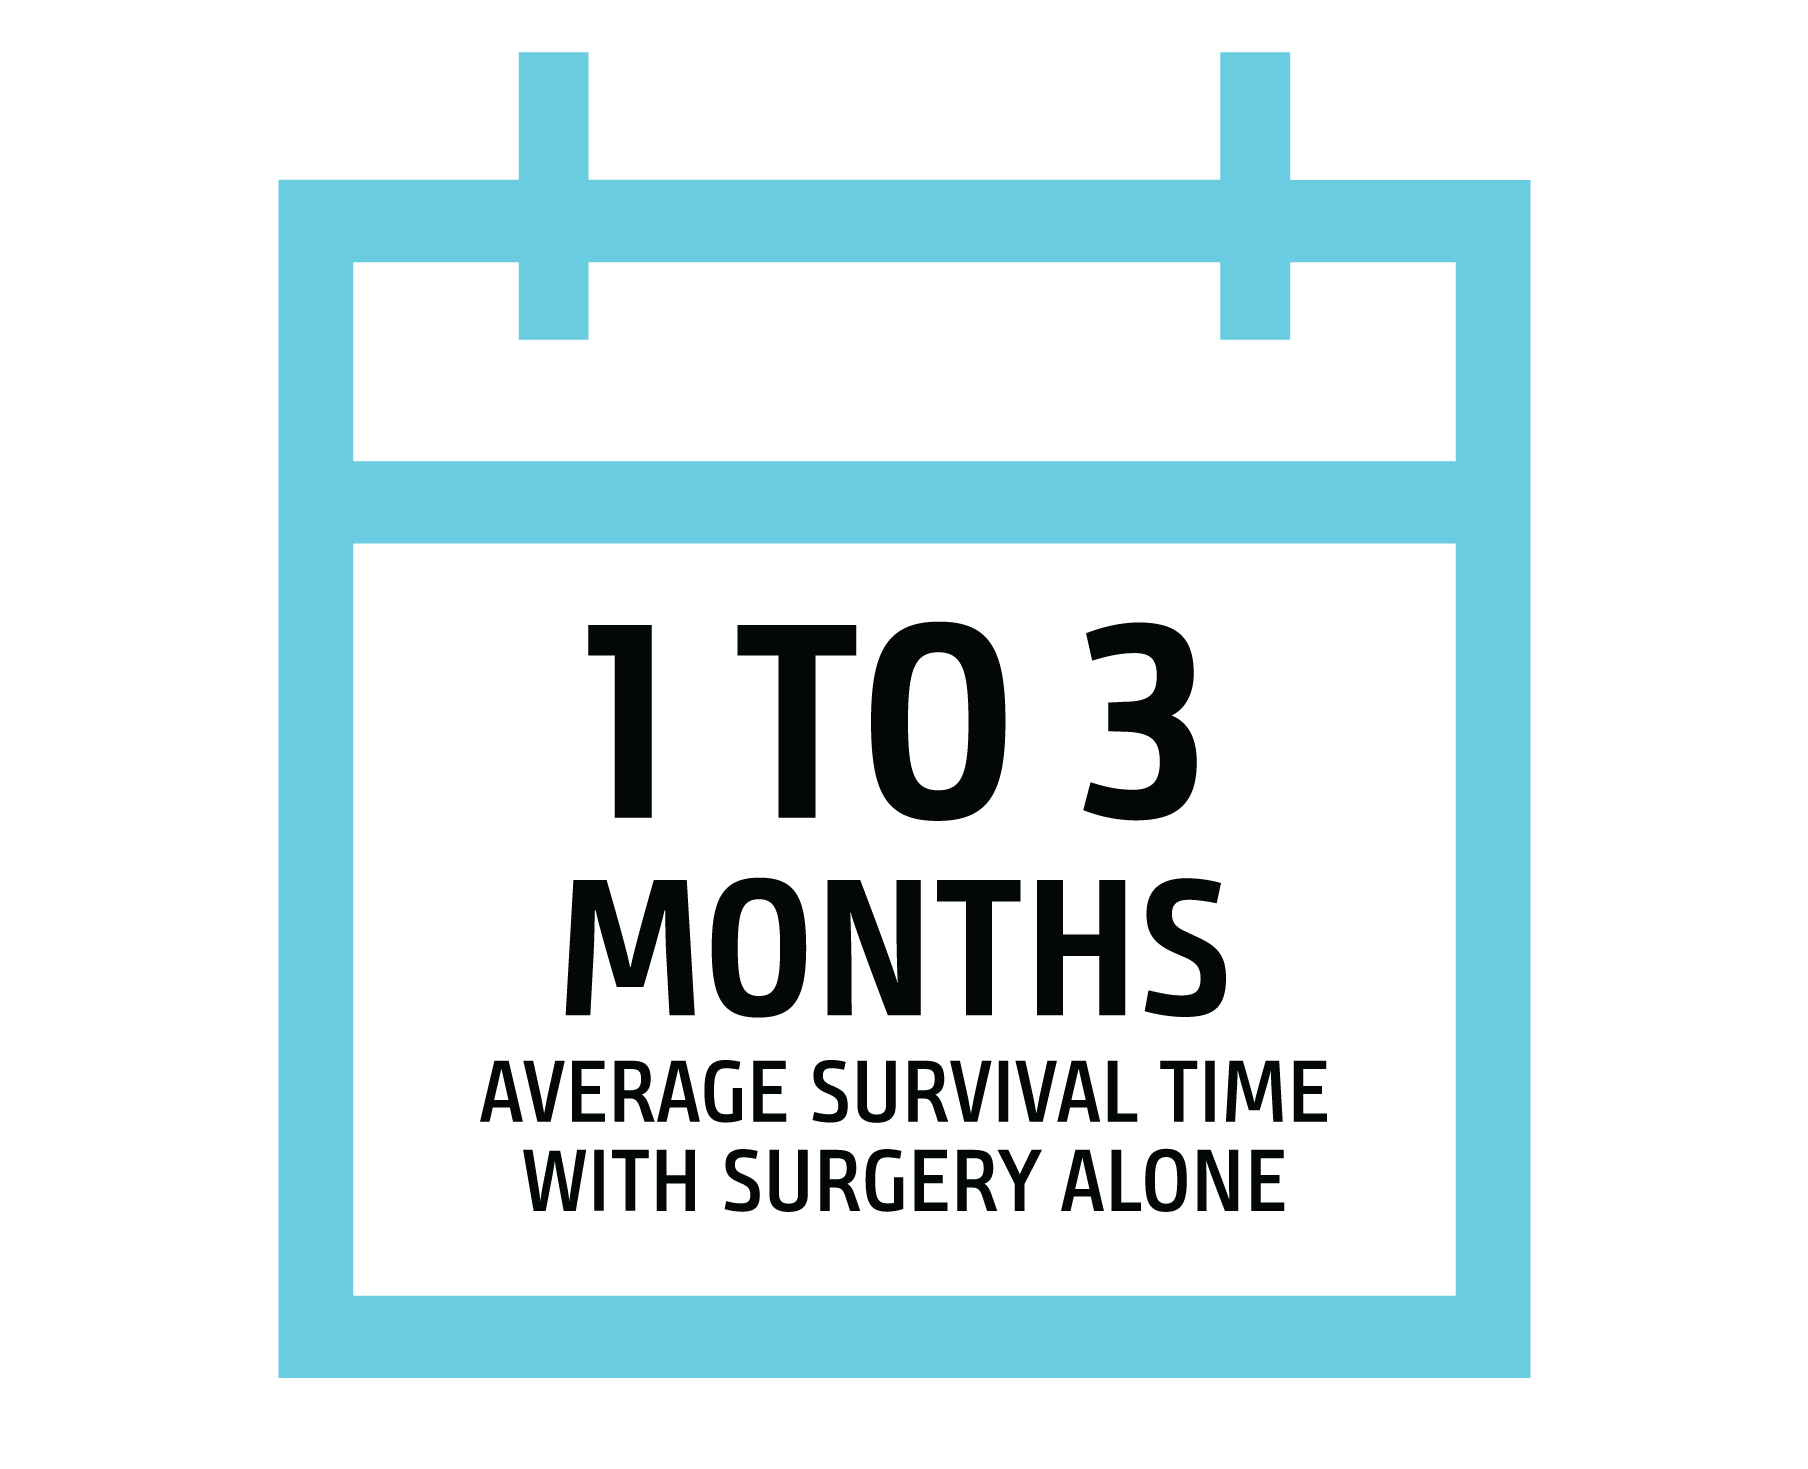 The average survival time with surgery alone is 1 to 3 months.